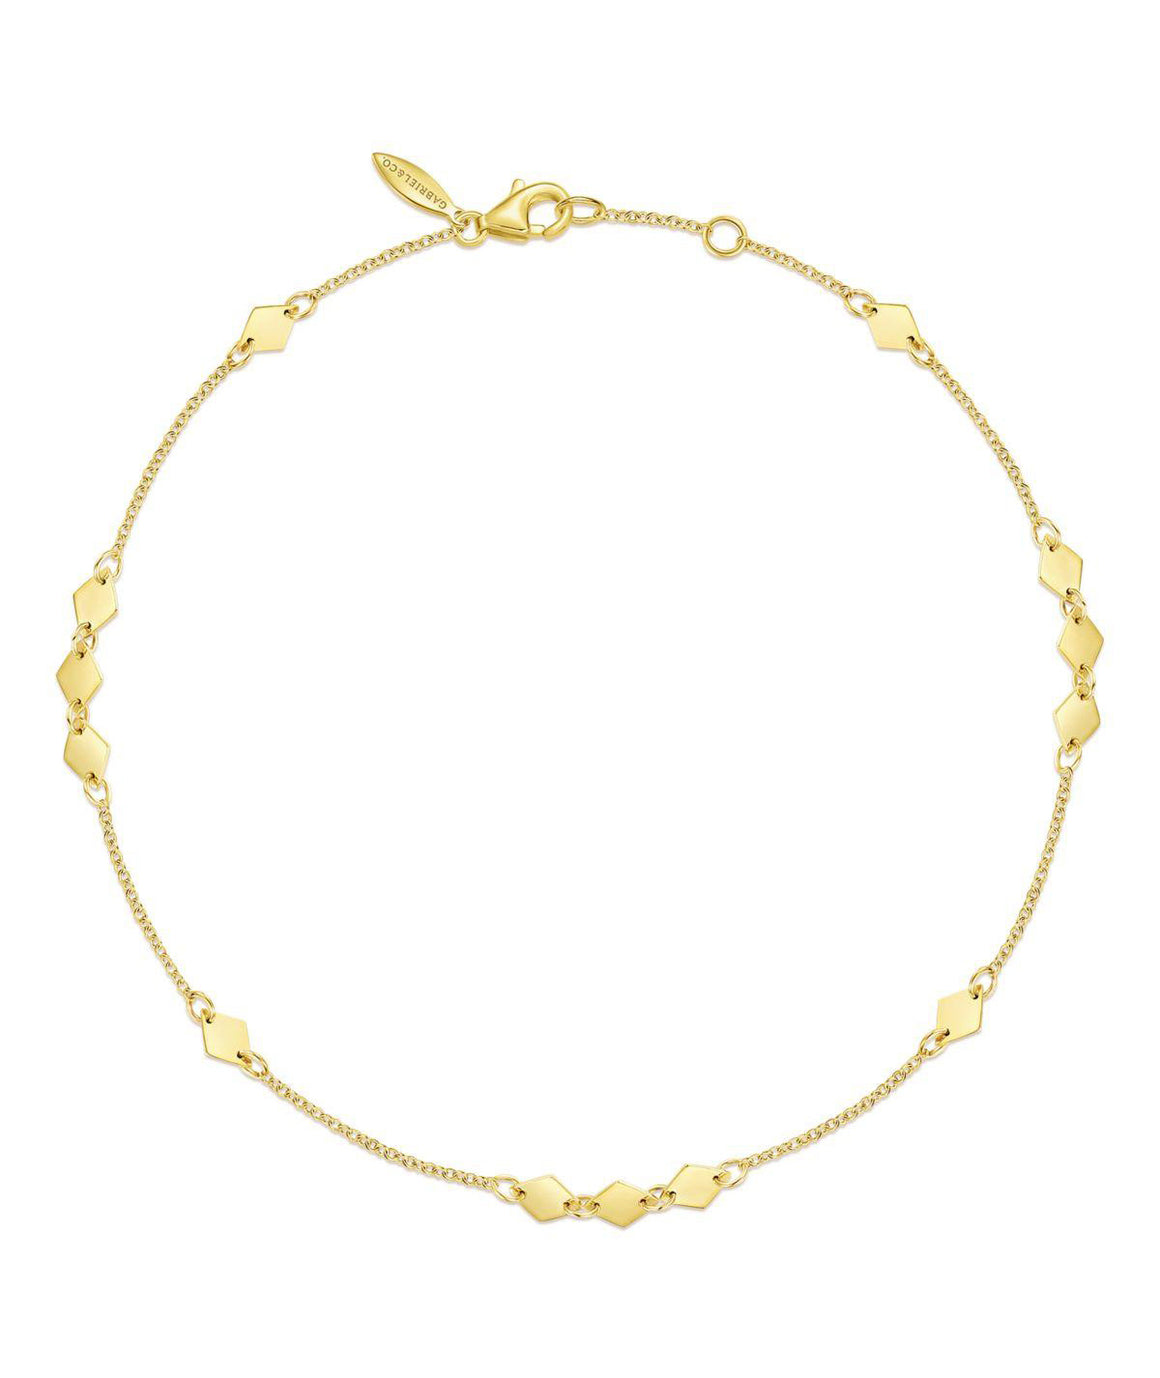 14K Yellow Gold Chain Ankle Bracelet with Diamond Shaped Stations